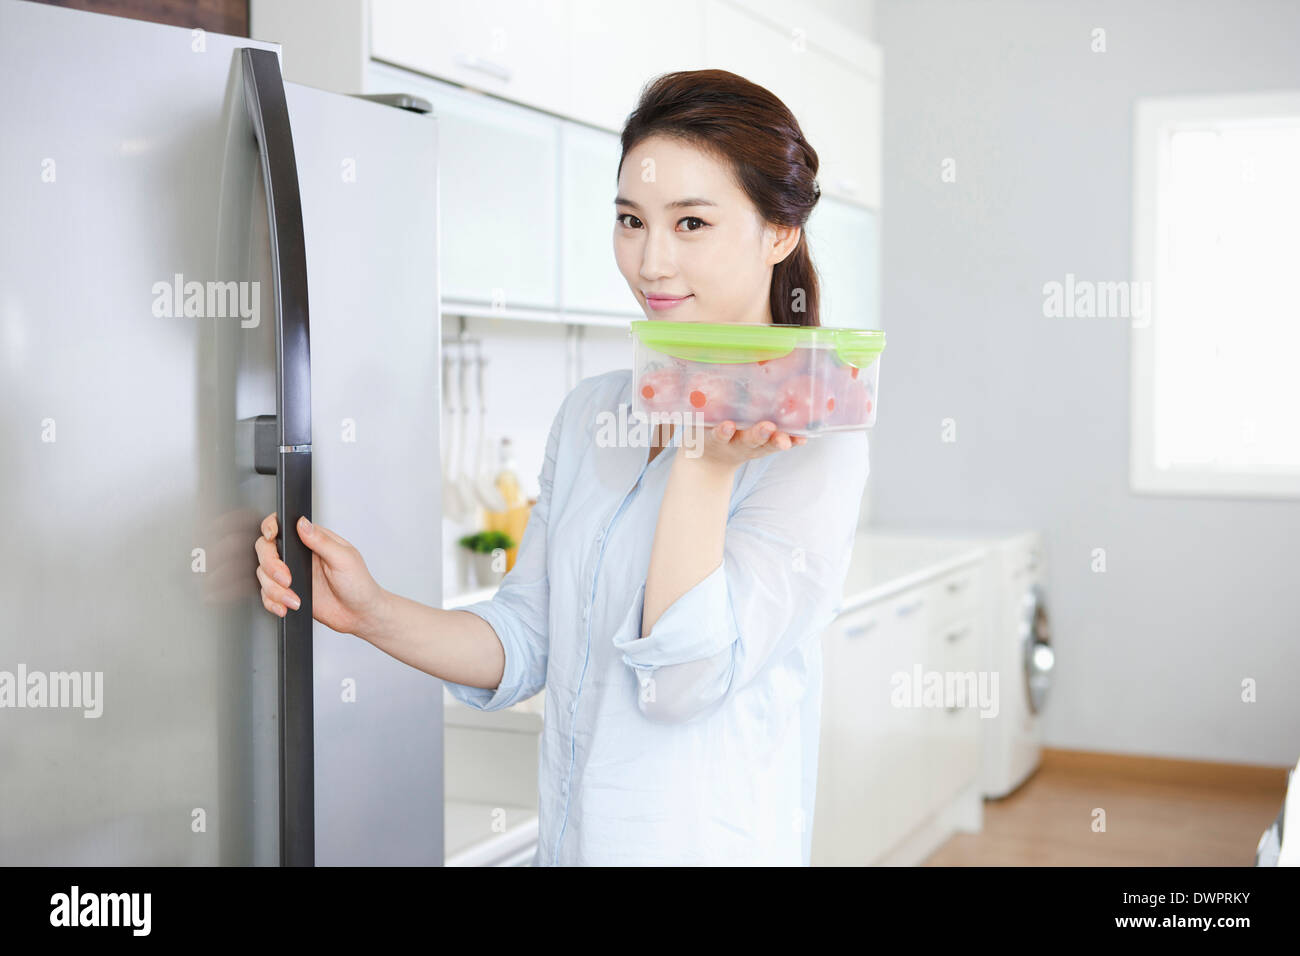 a woman taking out food from refrigerator in the kitchen Stock Photo